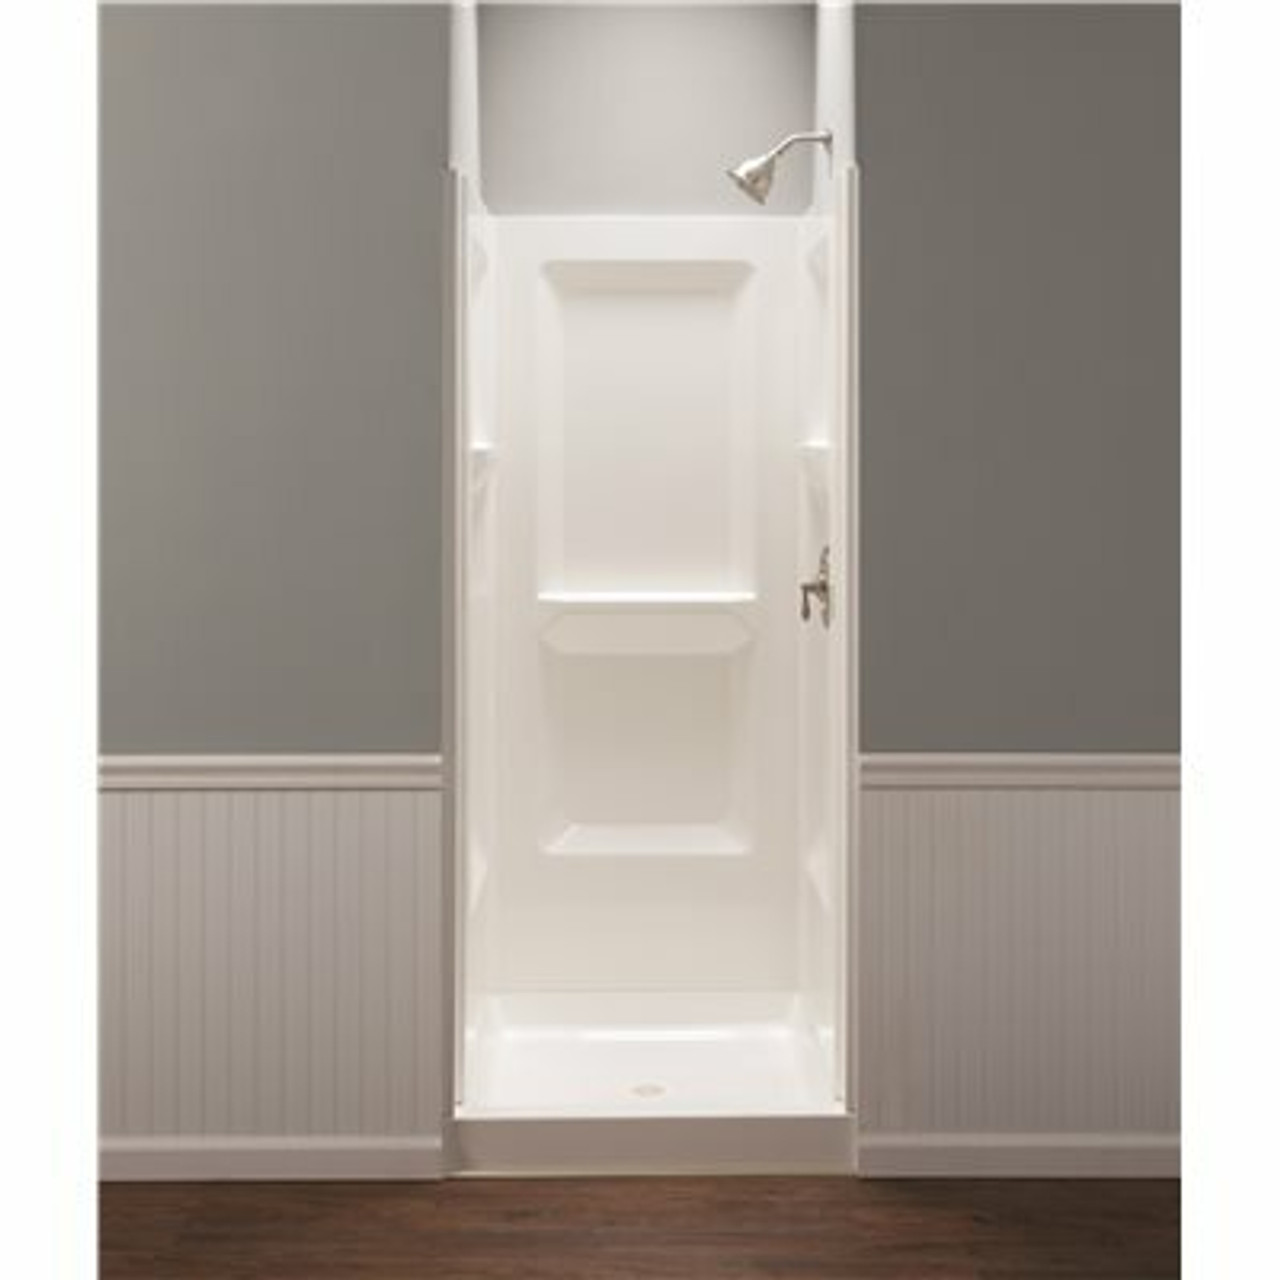 Mustee Durawall 32 In. X 32 In. X 73-1/4 In. 3-Piece Direct-To-Stud Alcove Shower Wall Set In White